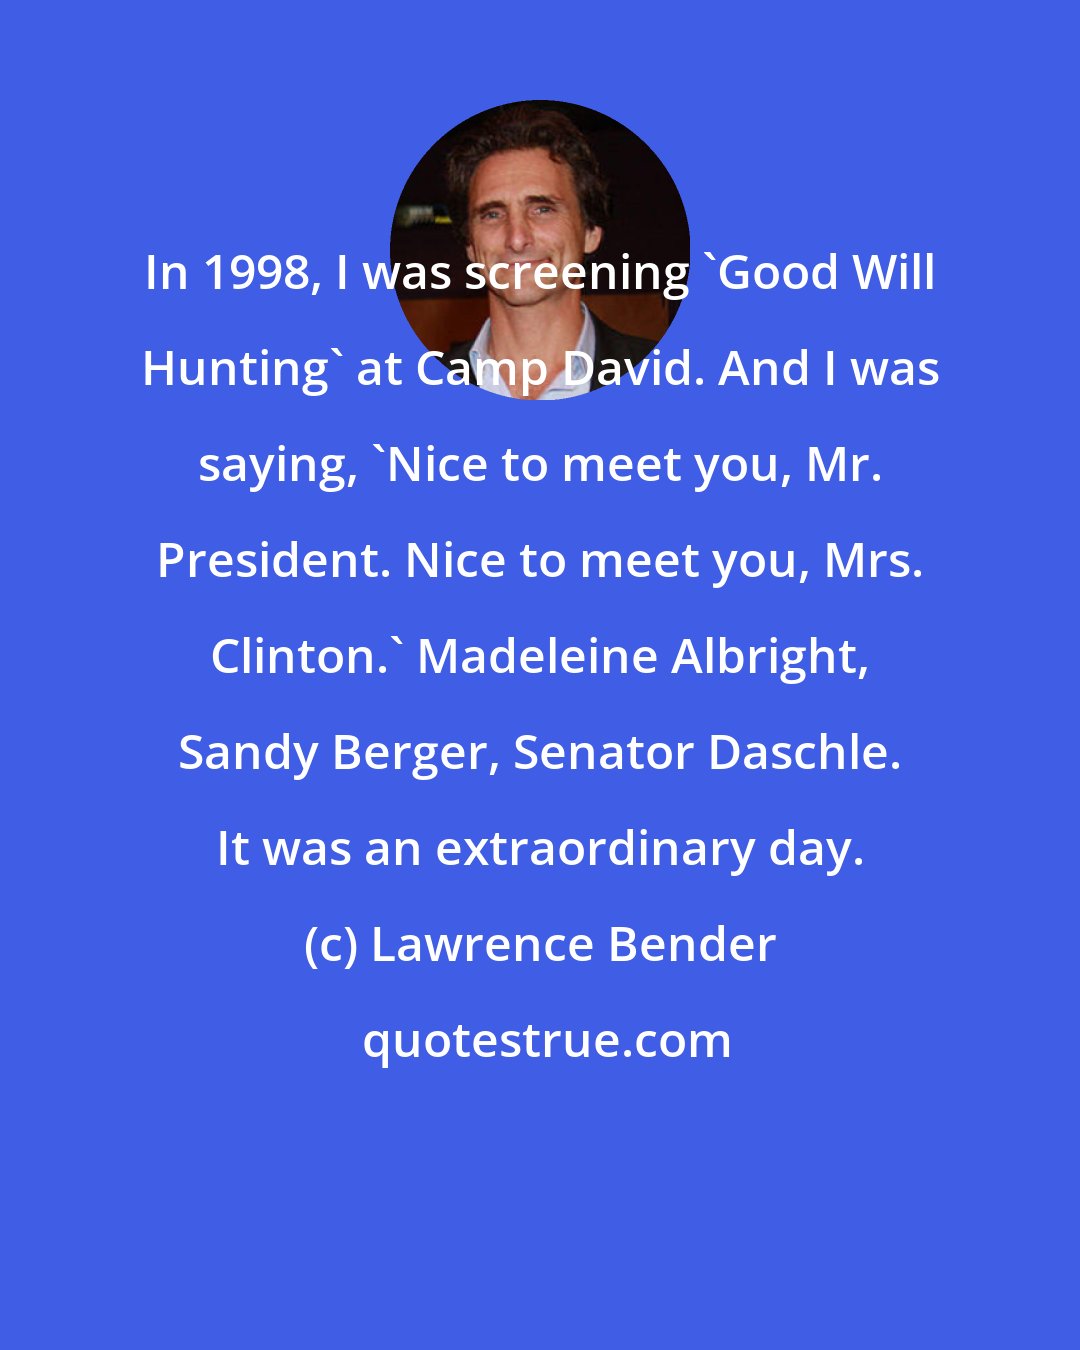 Lawrence Bender: In 1998, I was screening 'Good Will Hunting' at Camp David. And I was saying, 'Nice to meet you, Mr. President. Nice to meet you, Mrs. Clinton.' Madeleine Albright, Sandy Berger, Senator Daschle. It was an extraordinary day.